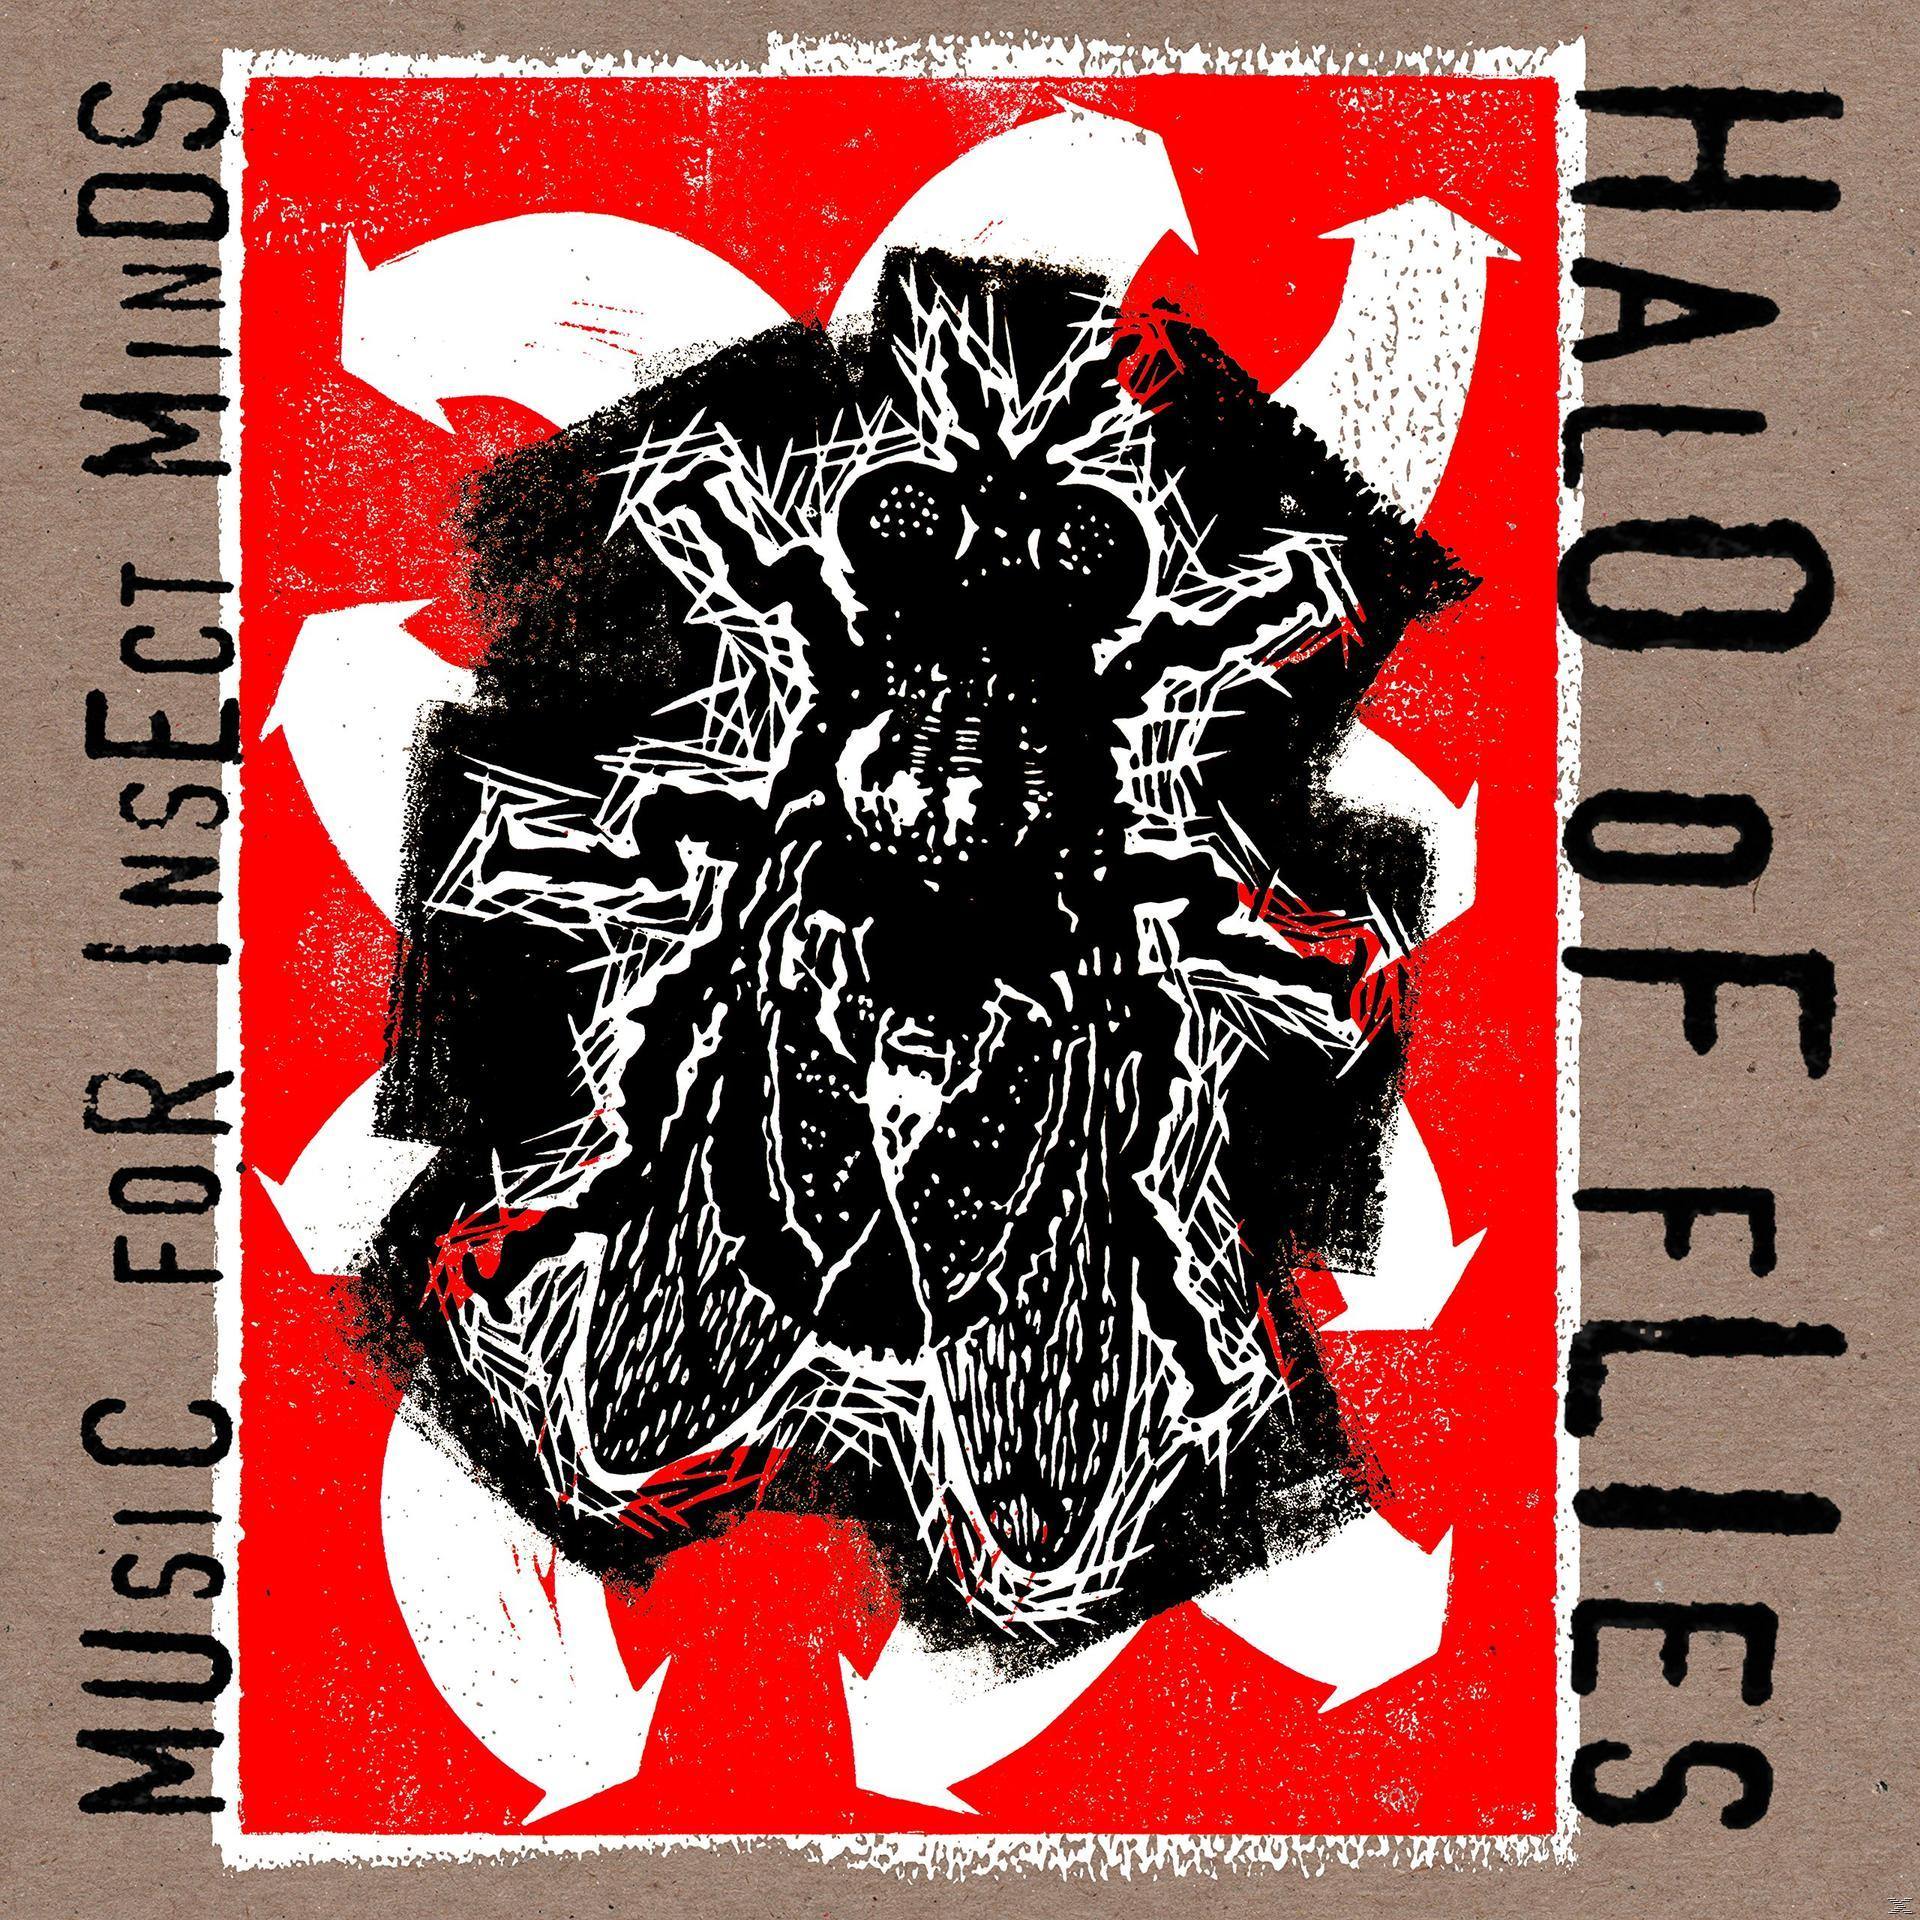 Halo Of Flies (Vinyl) - Minds - For Music Insect